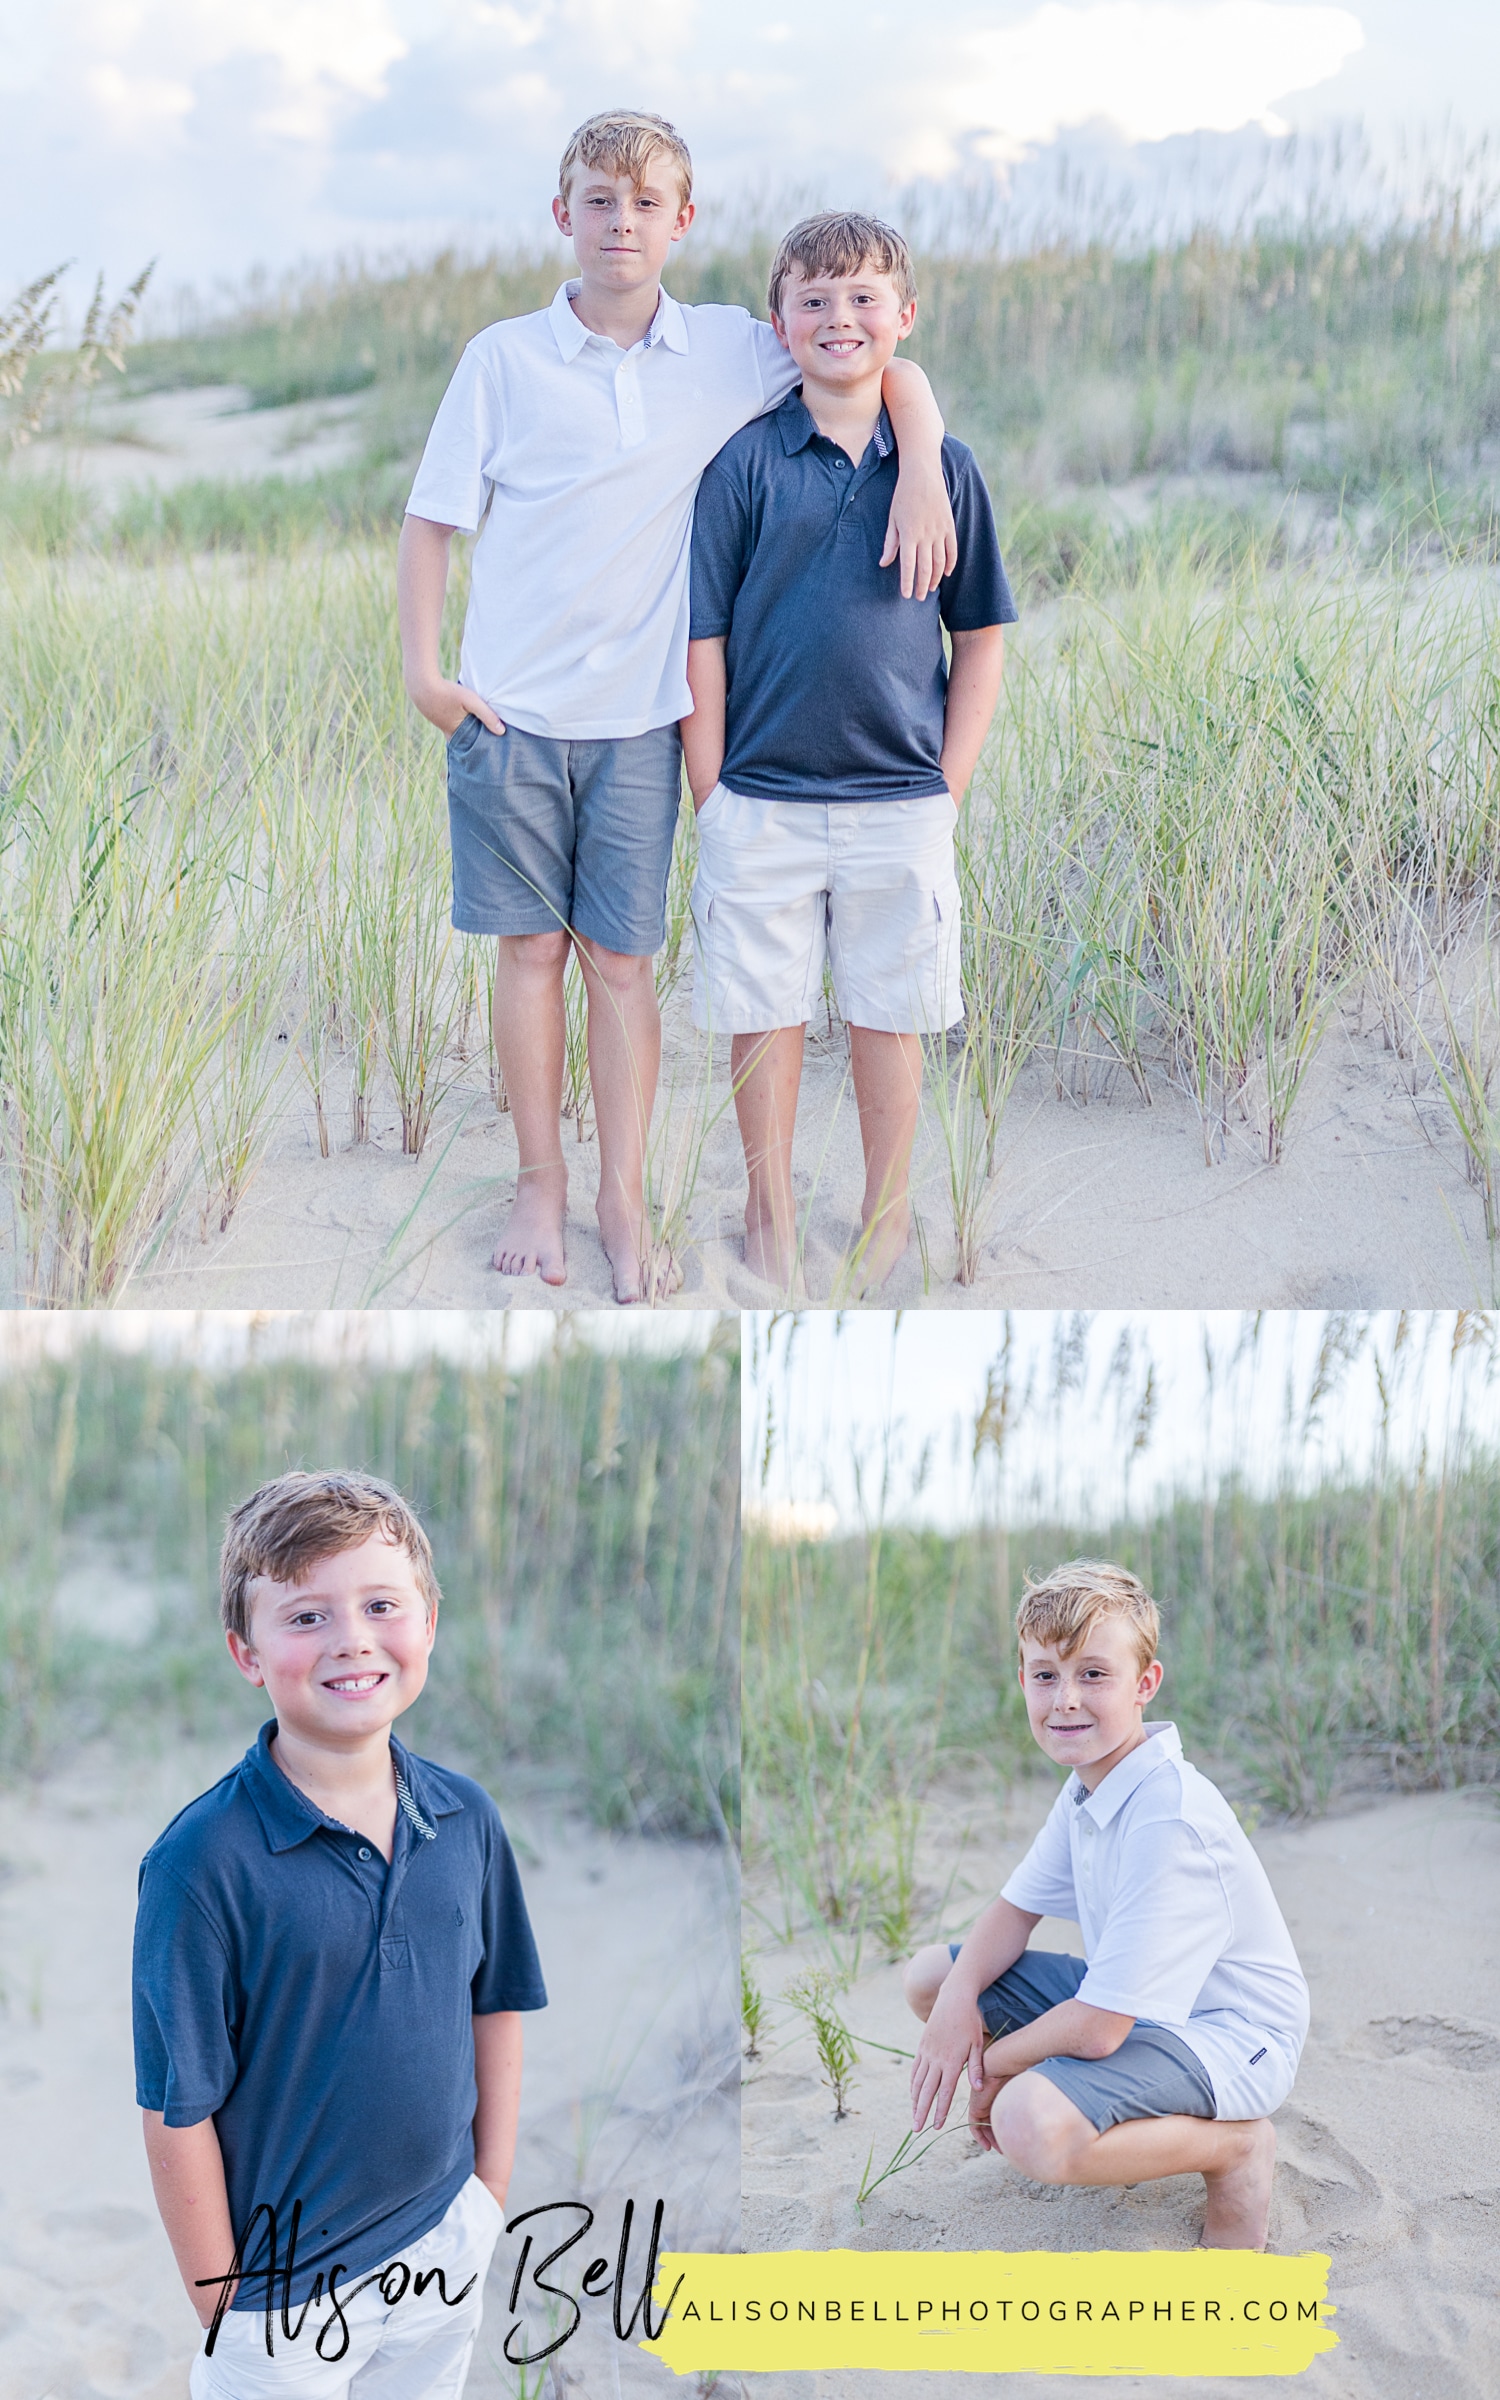 North end virginia beach family photo sessions at 81st by alison bell, photographer